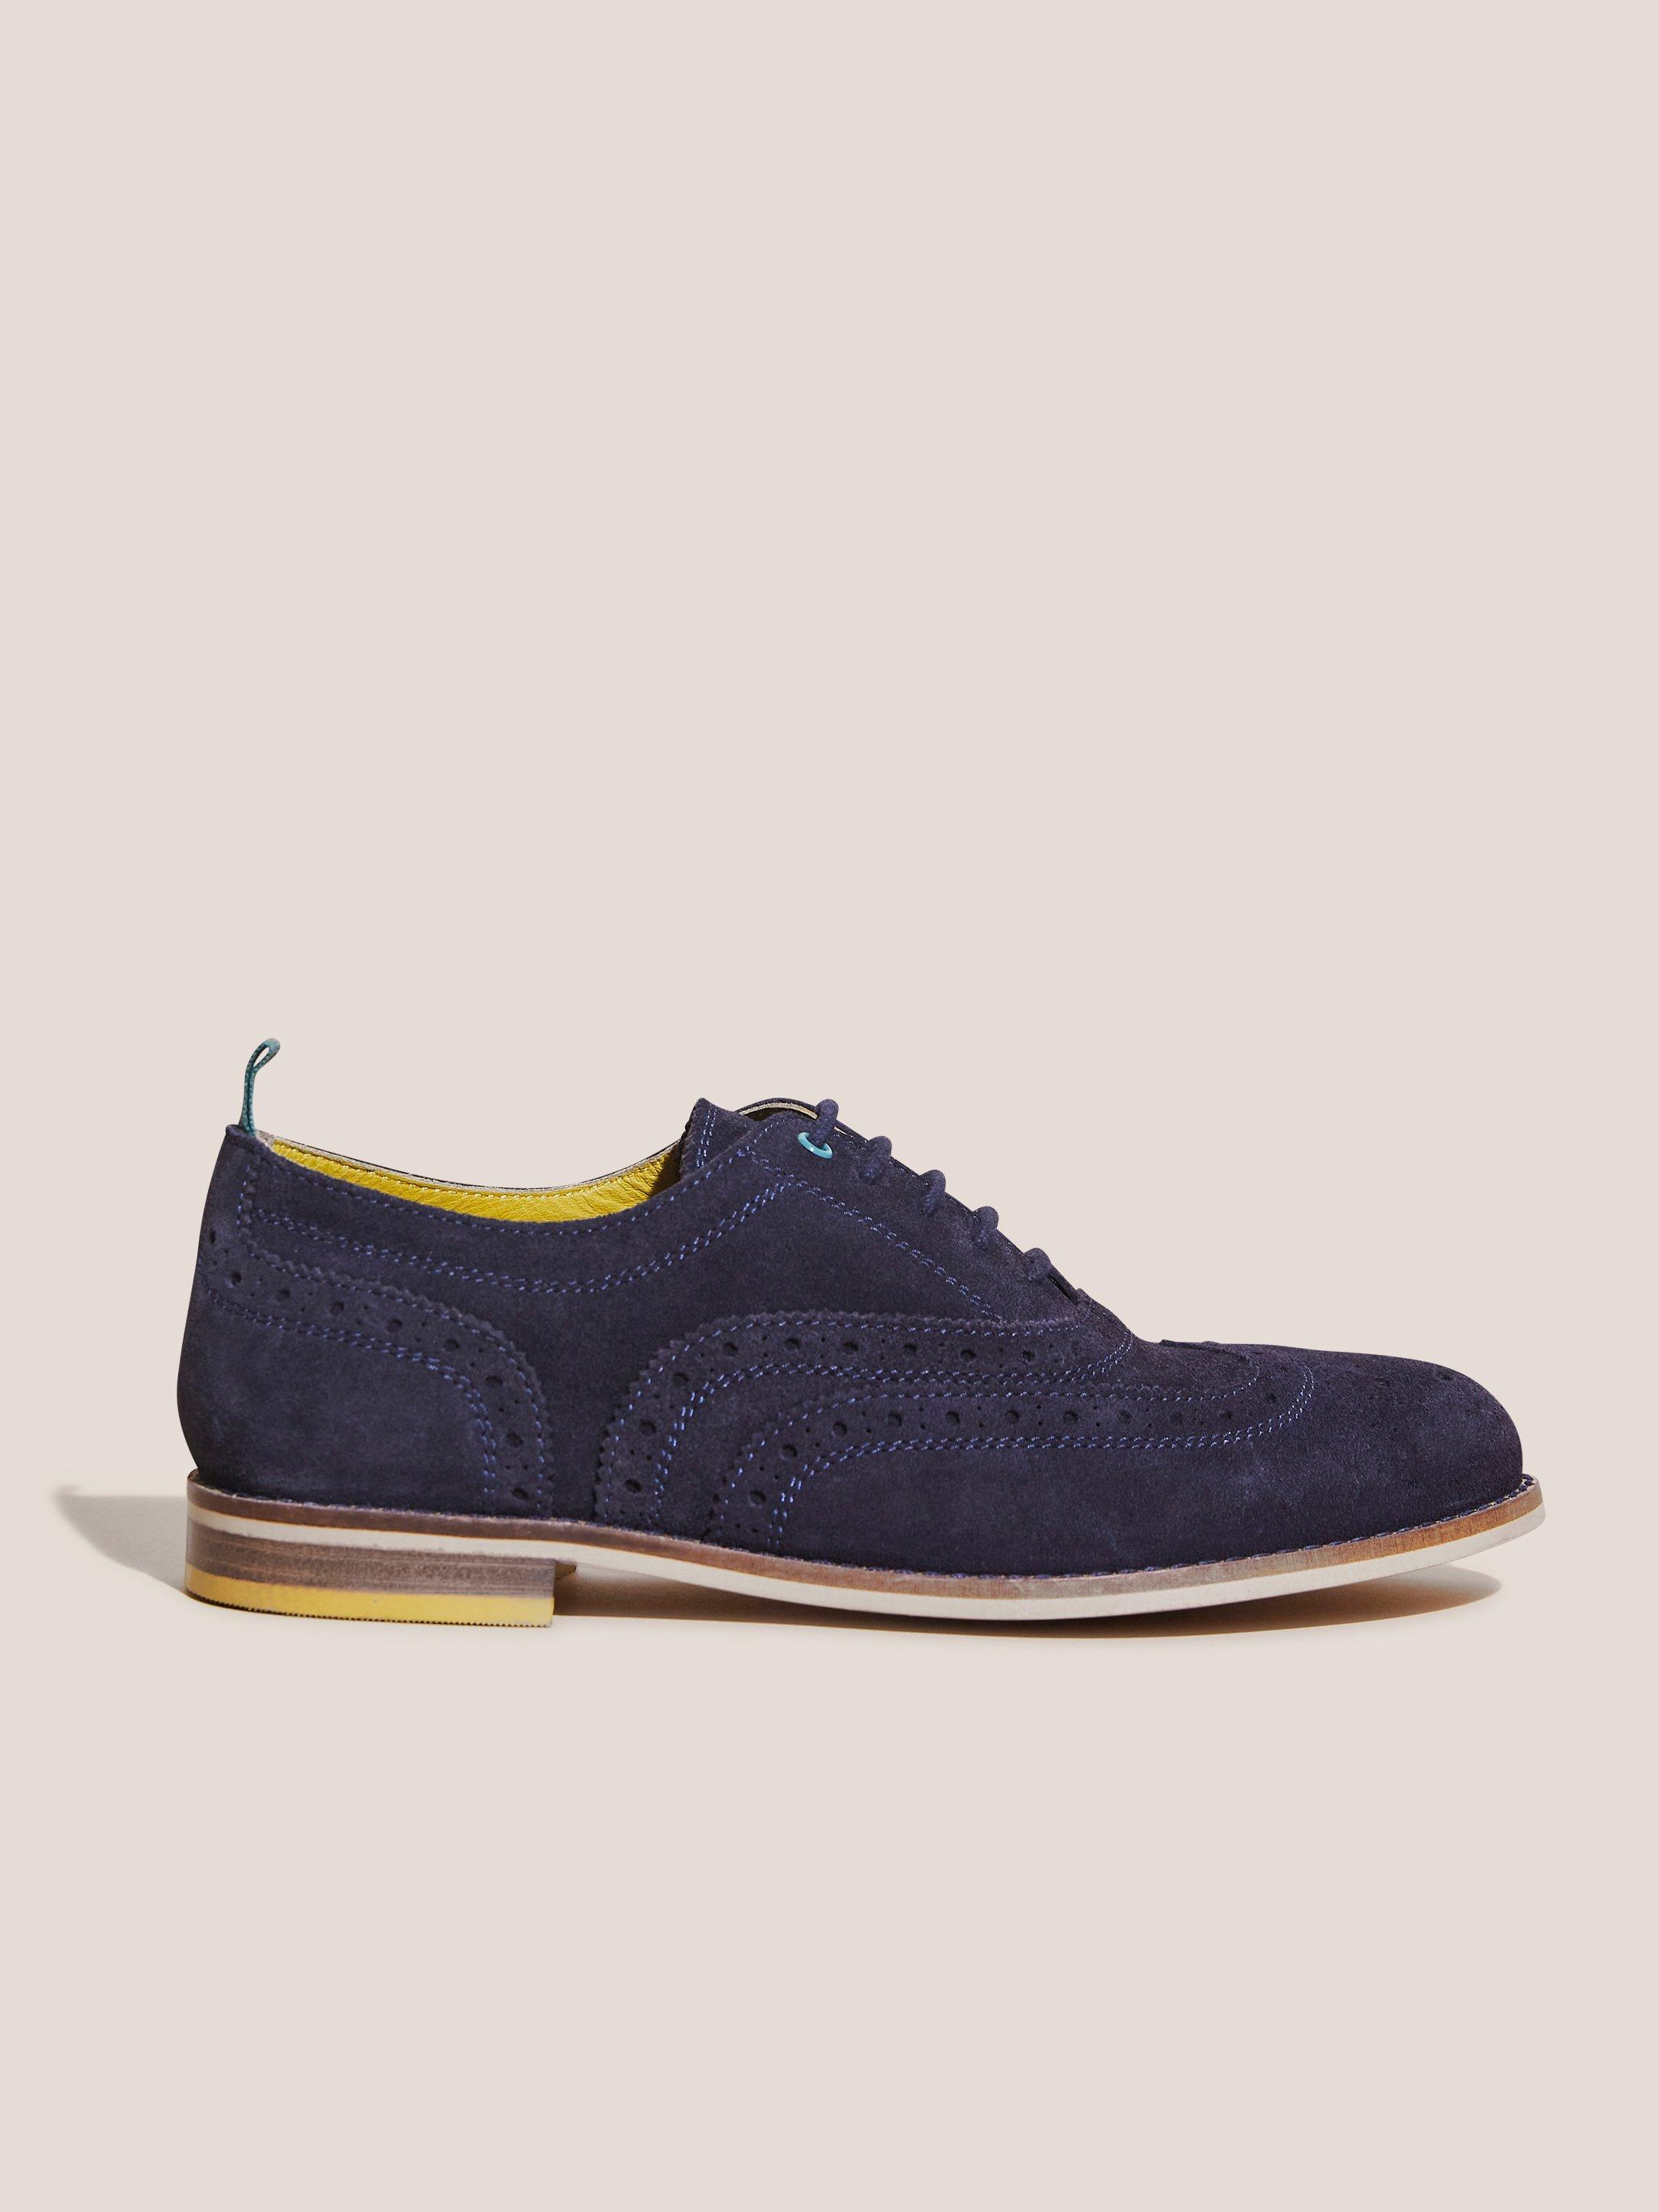 Thistle Lace Up Brogue